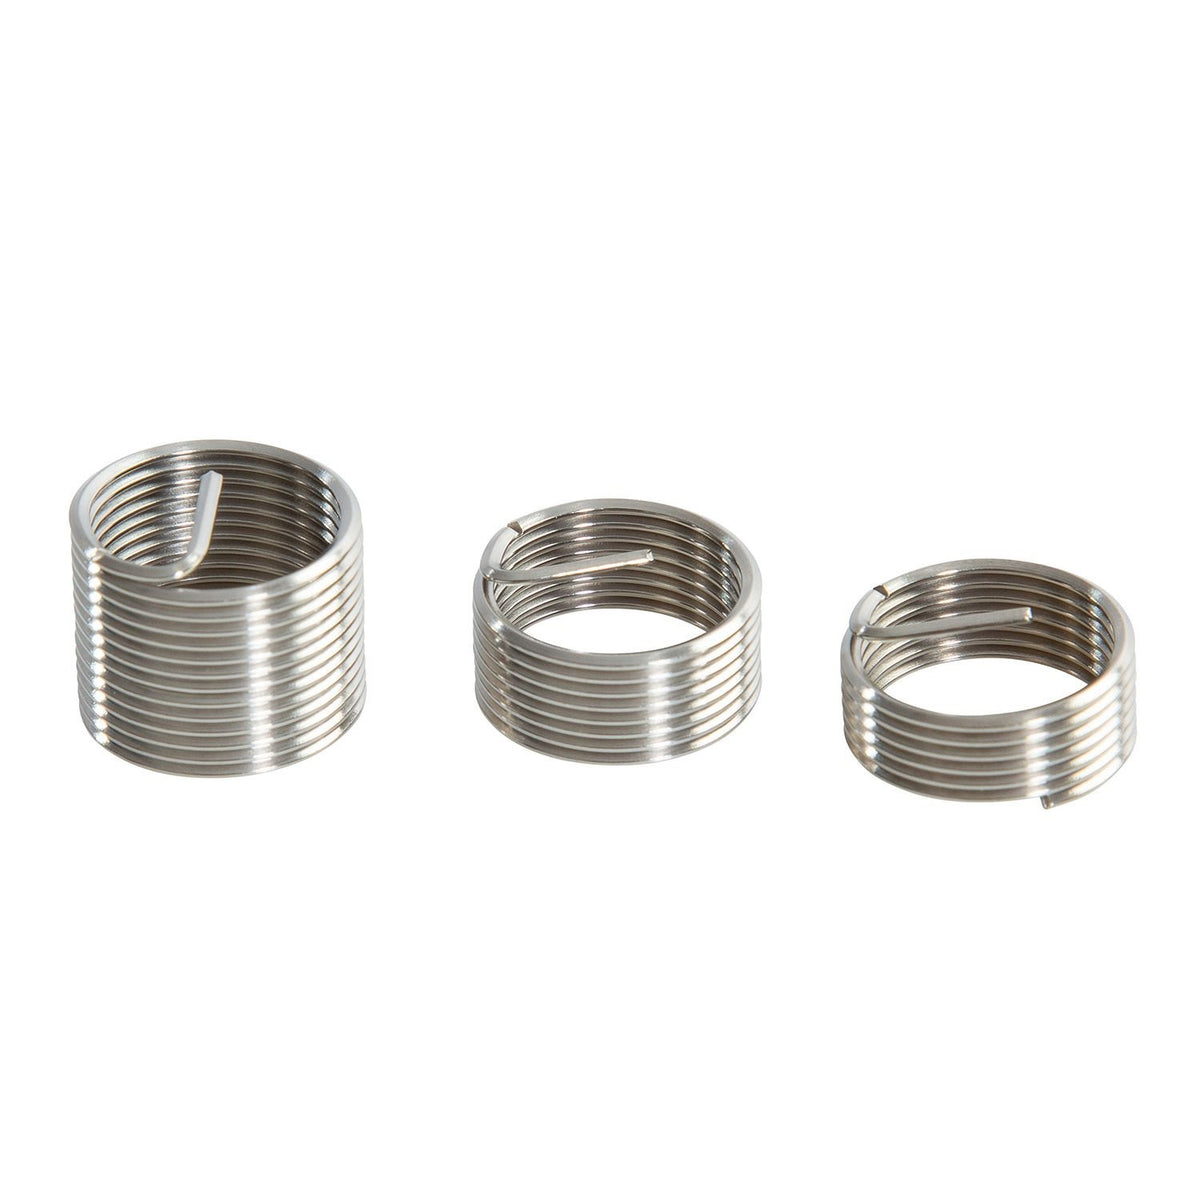 OEMTOOLS 25644 Helical Thread Insert, Stainless Steel